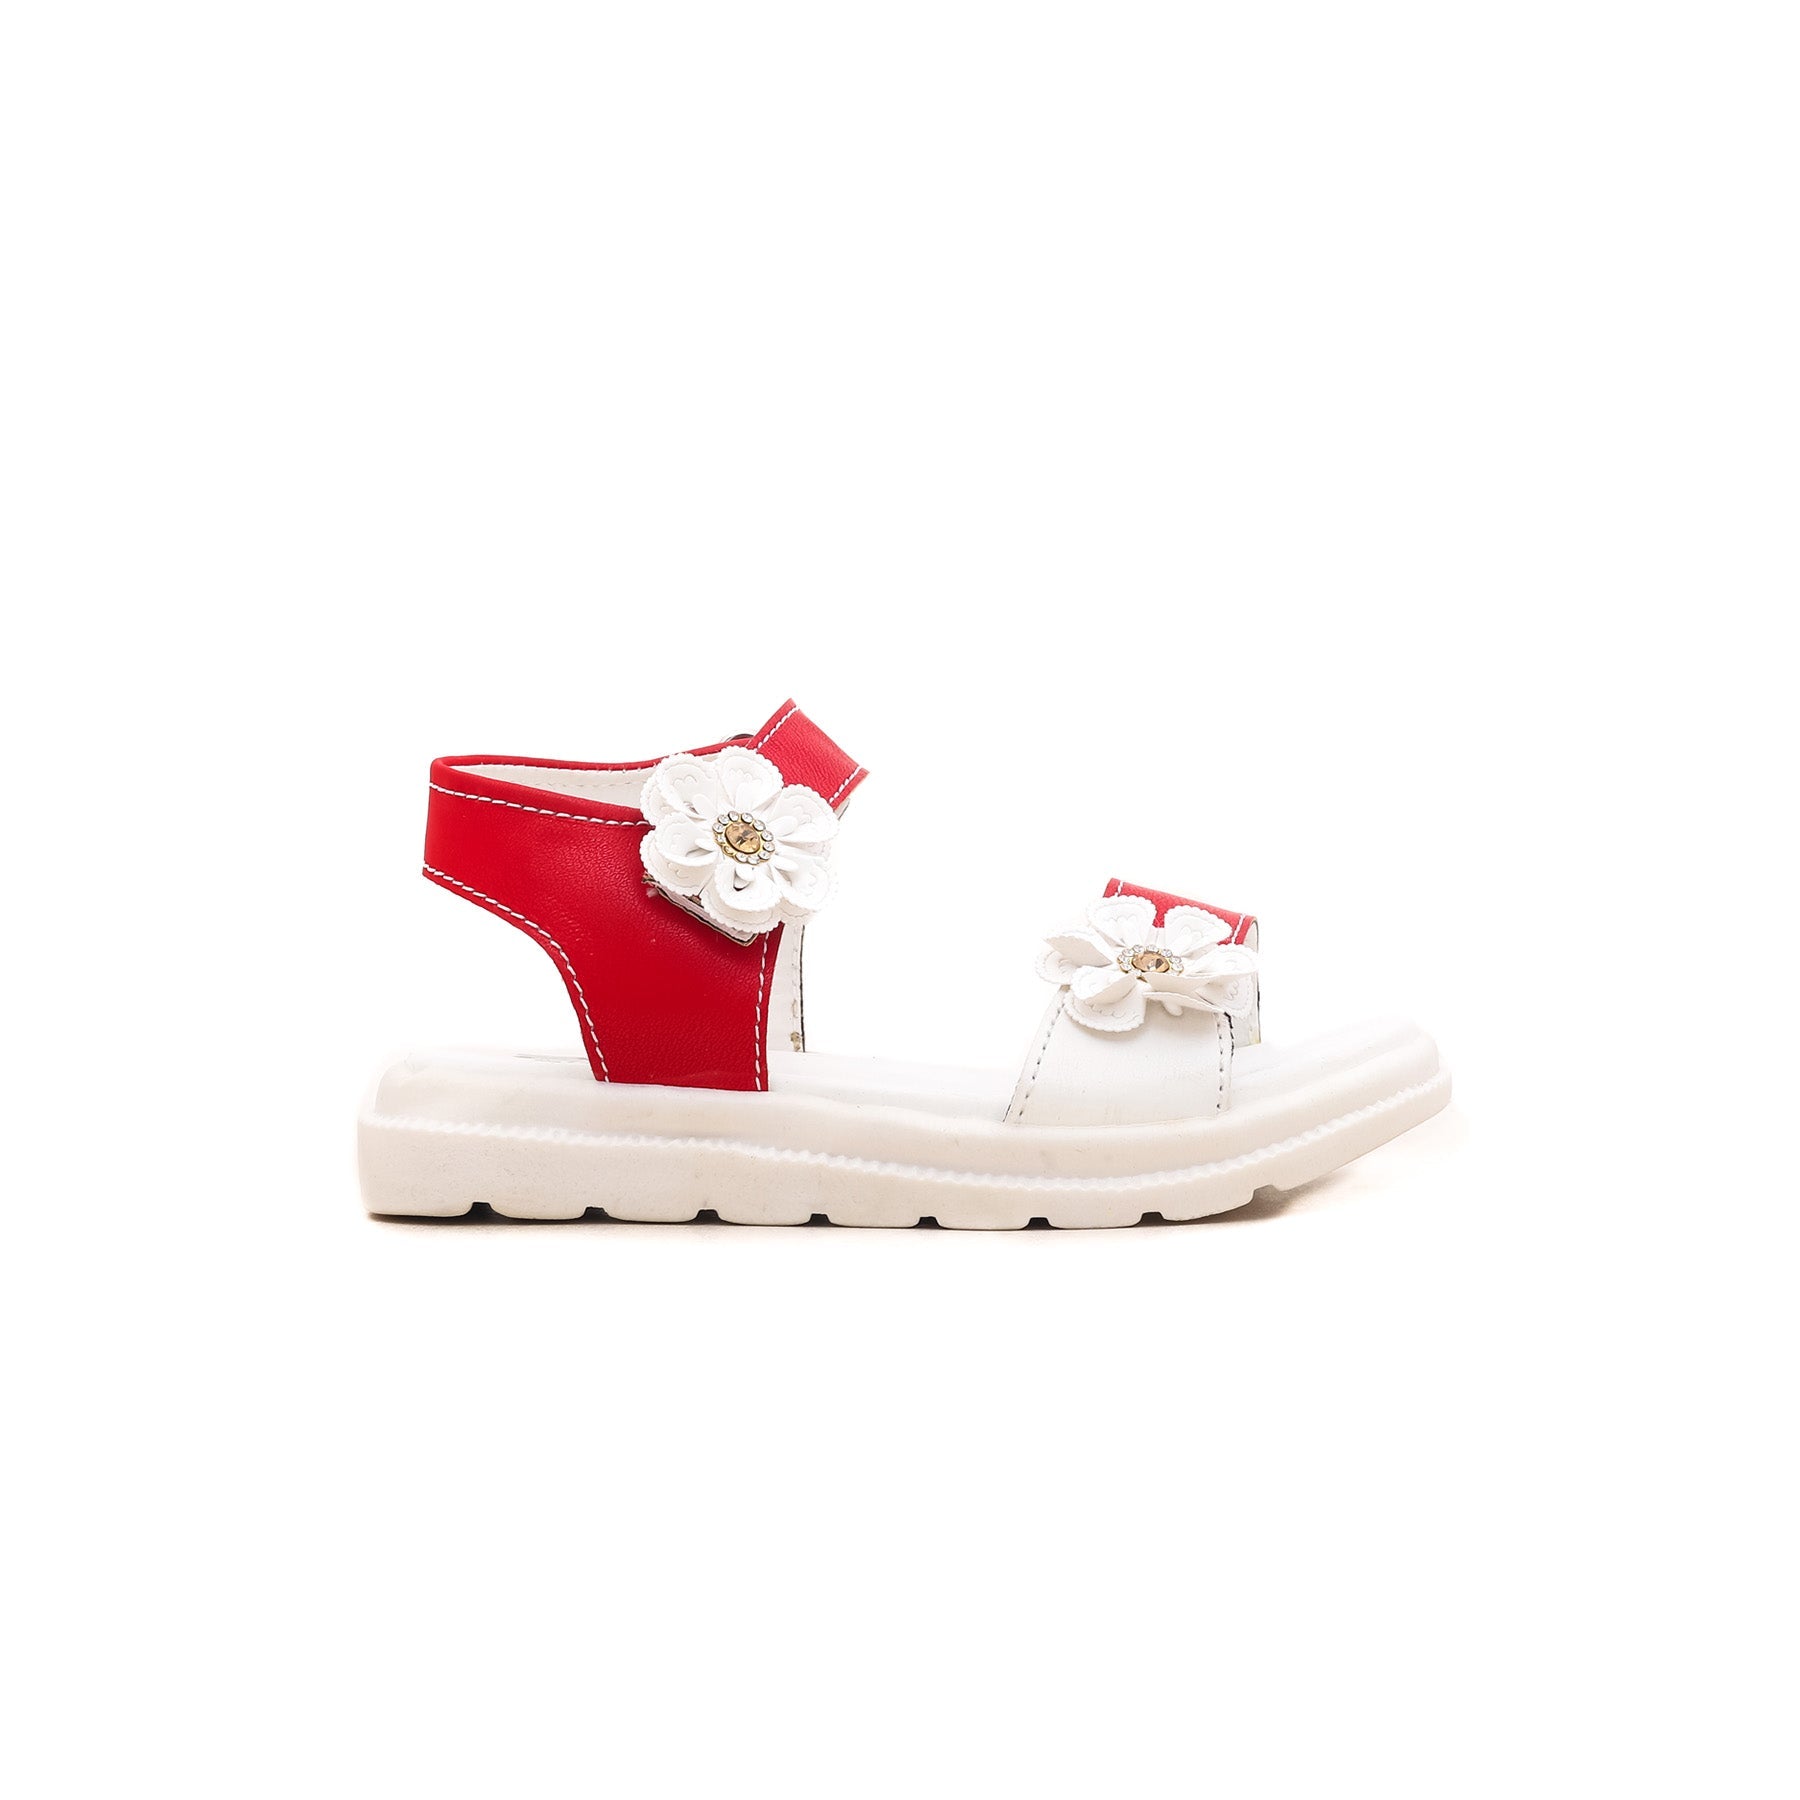 Girls Red Casual Sandal KD7587